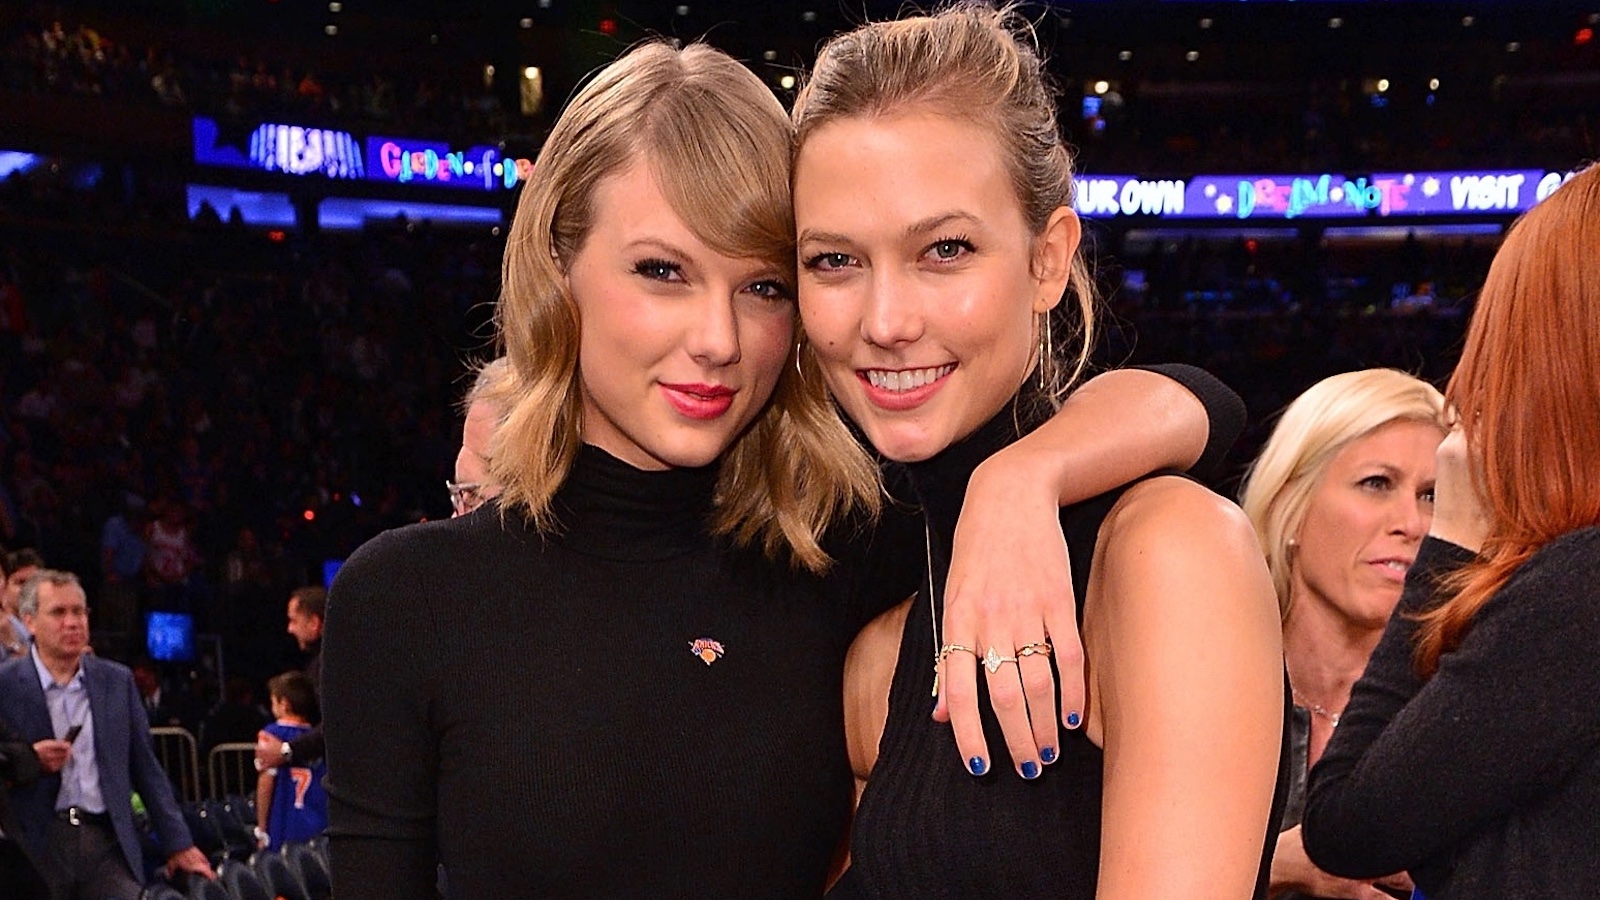 What Happened Between Karlie Kloss and Taylor Swift?